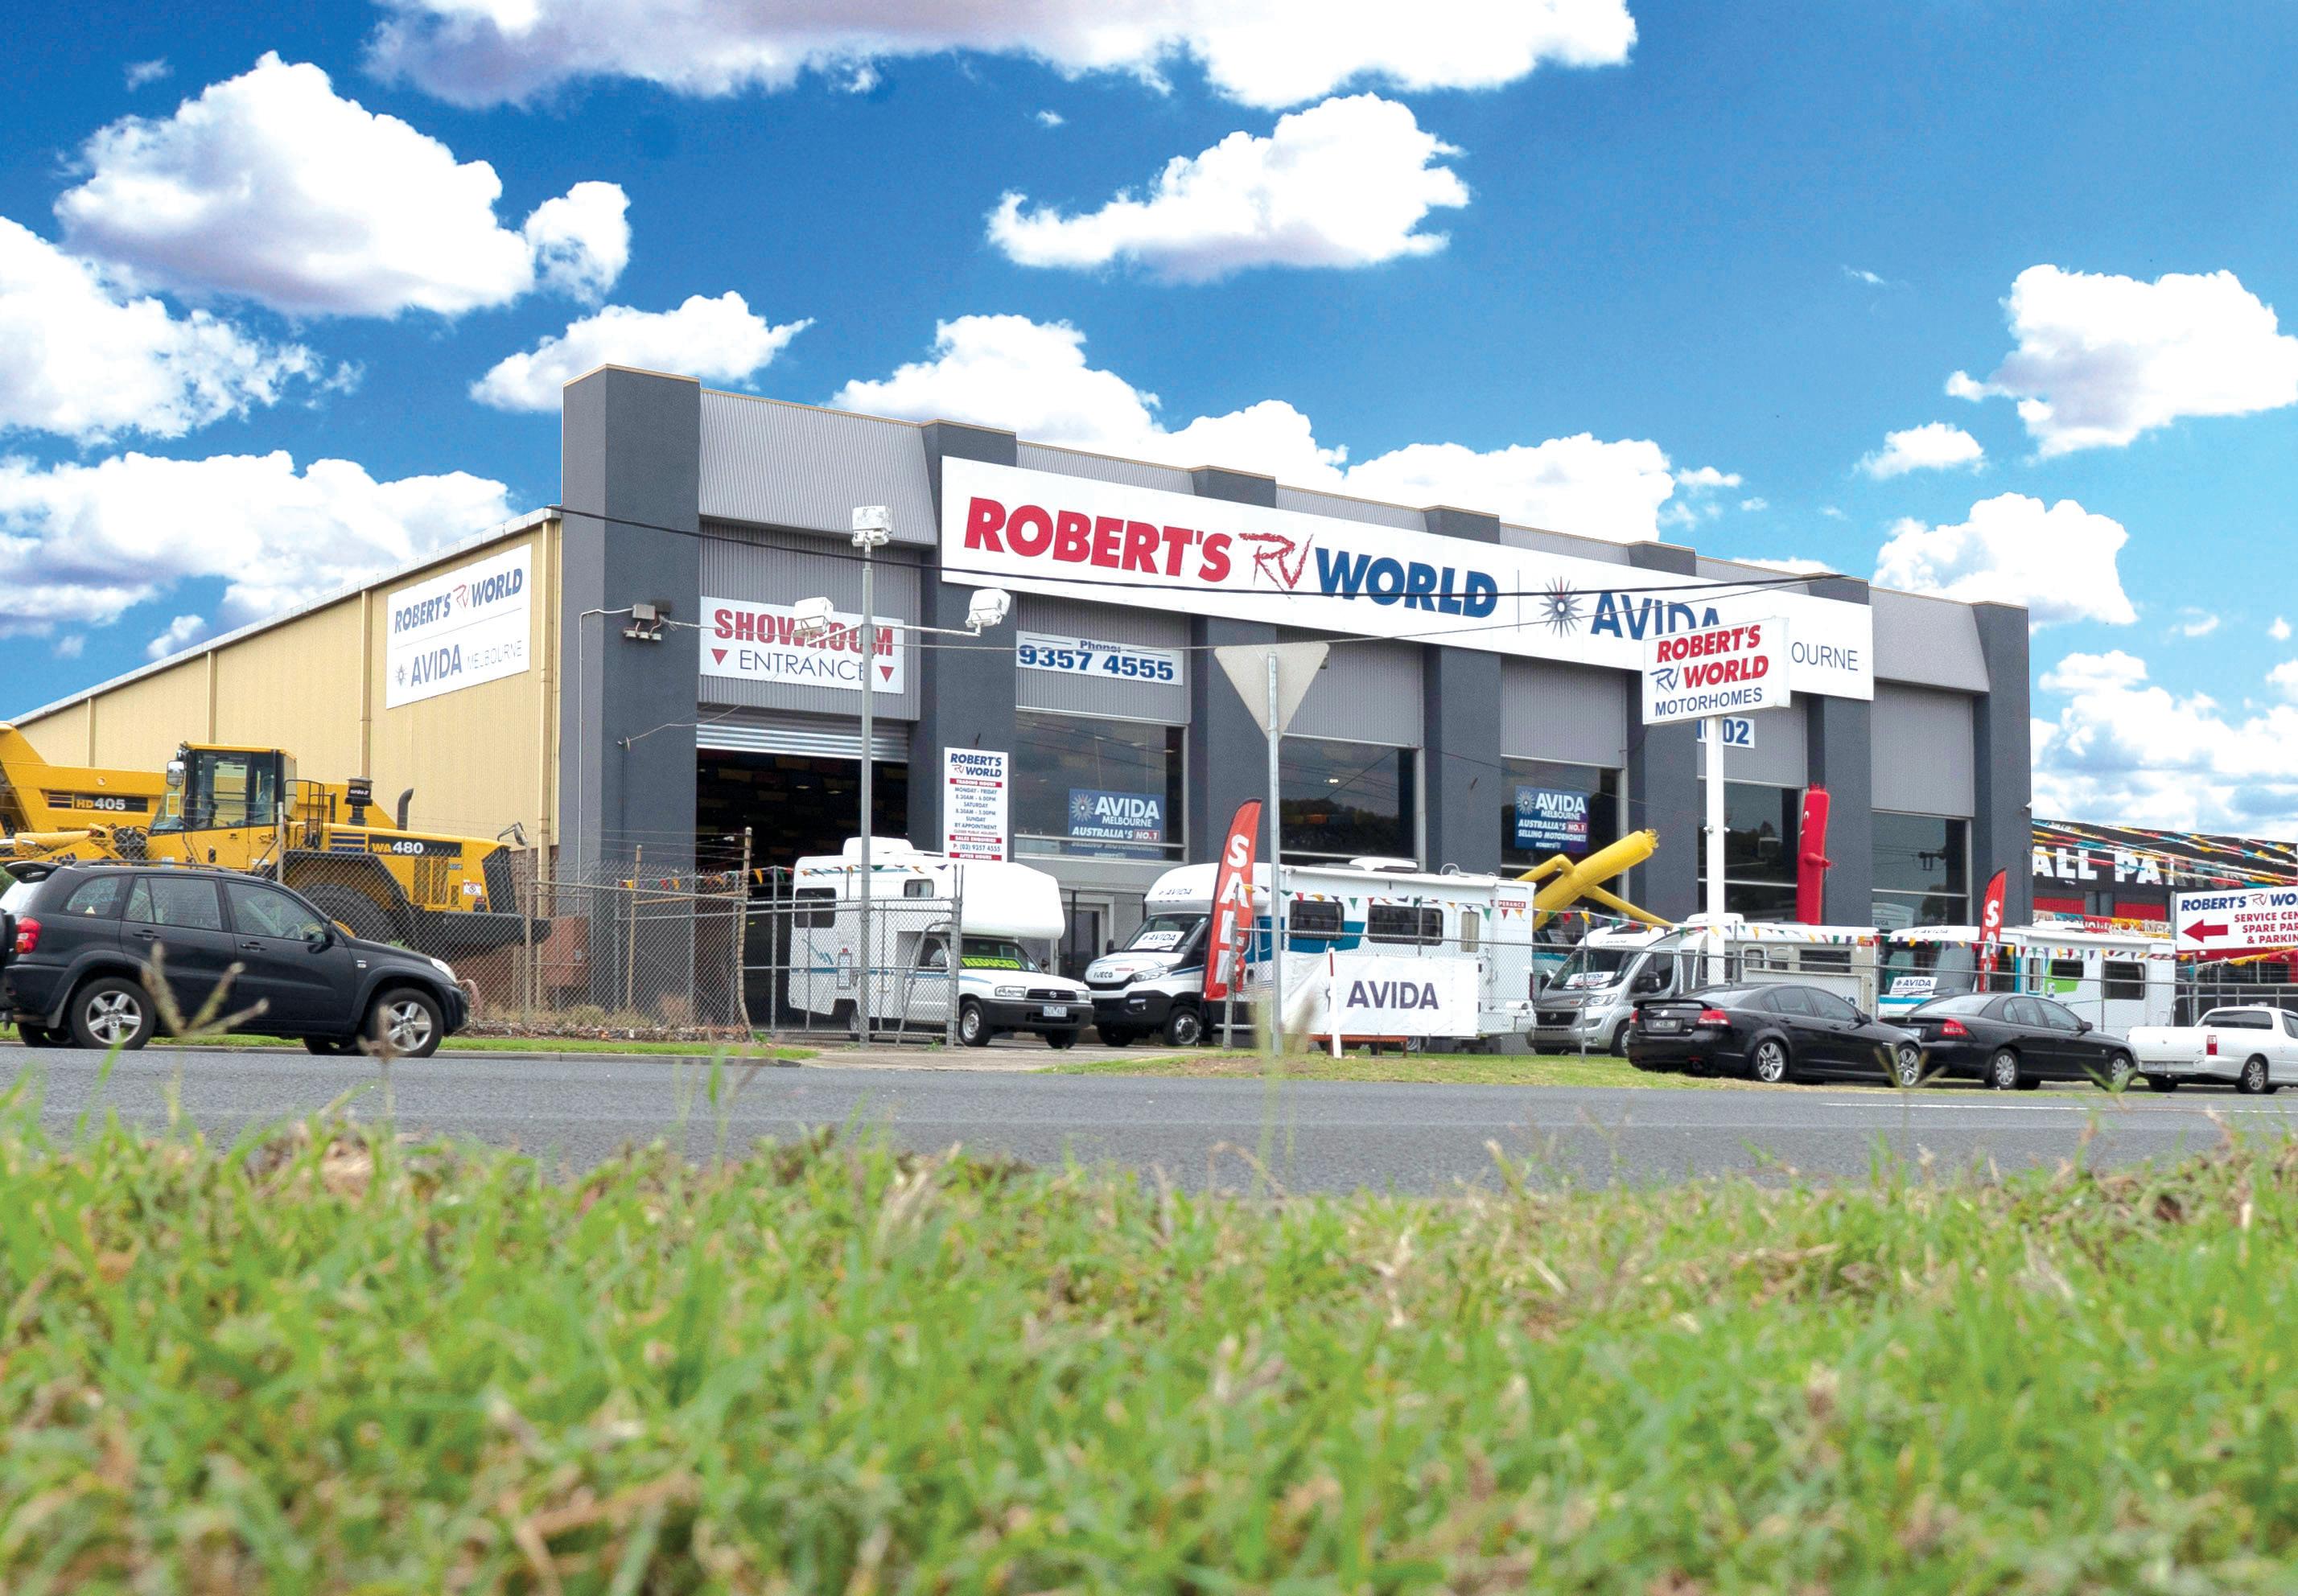 Robert's World is the largest RV dealer in the Southern Hemisphere; It's obvious which brand is most